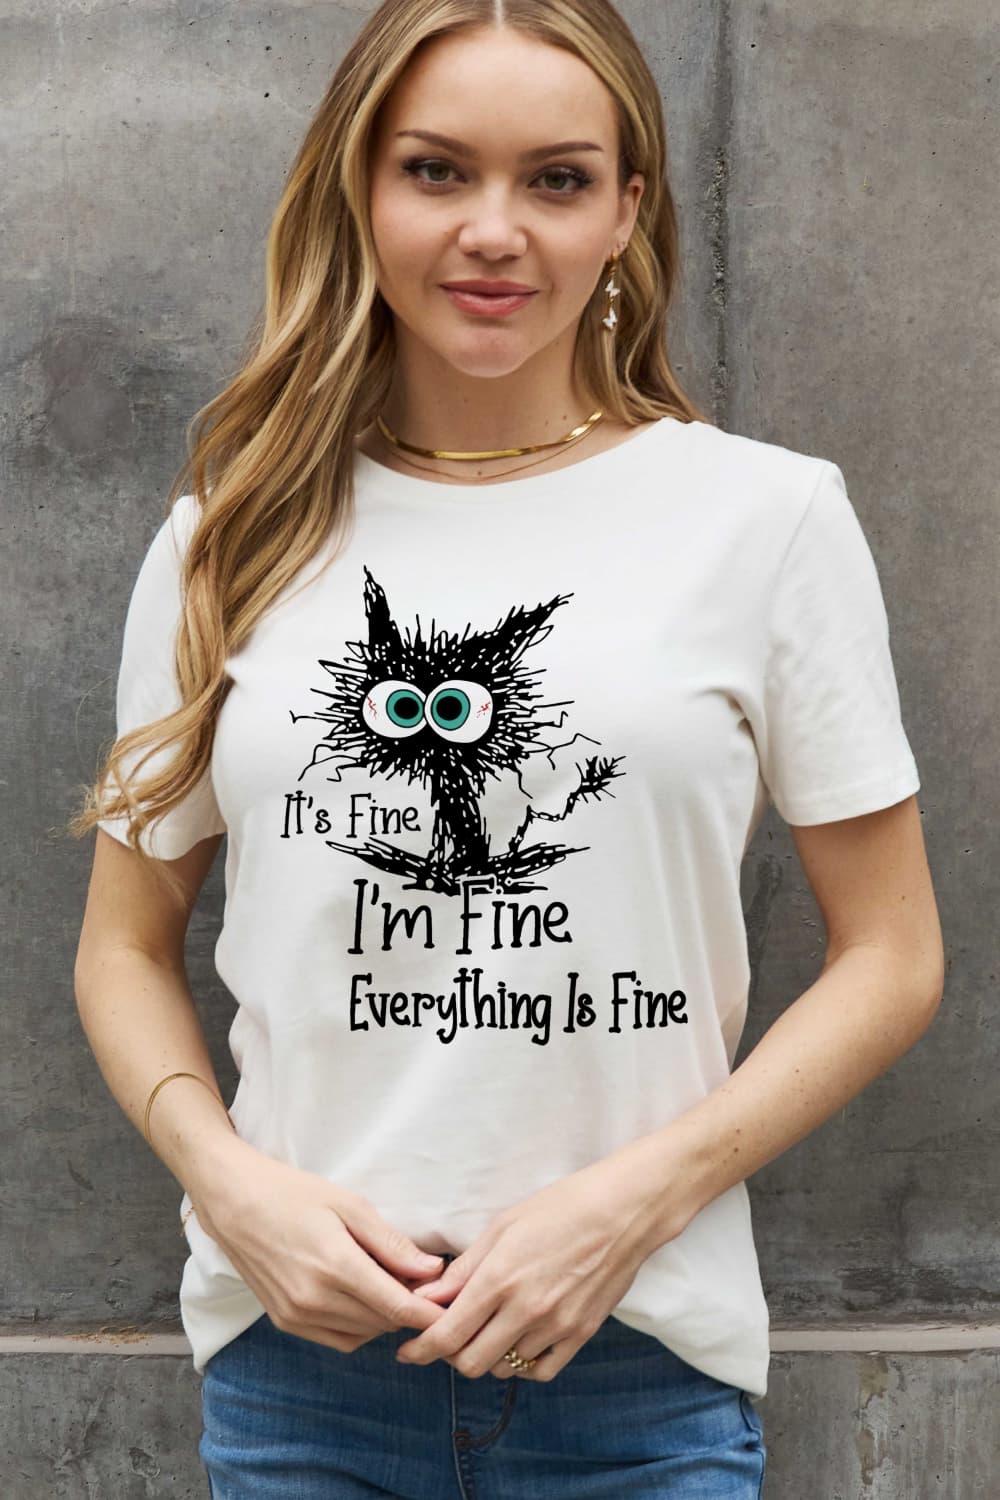 Simply Love Full Size IT鈥楽 FINE IT鈥楽 FINE EVERYTHING IS FINE Graphic Cotton Tee